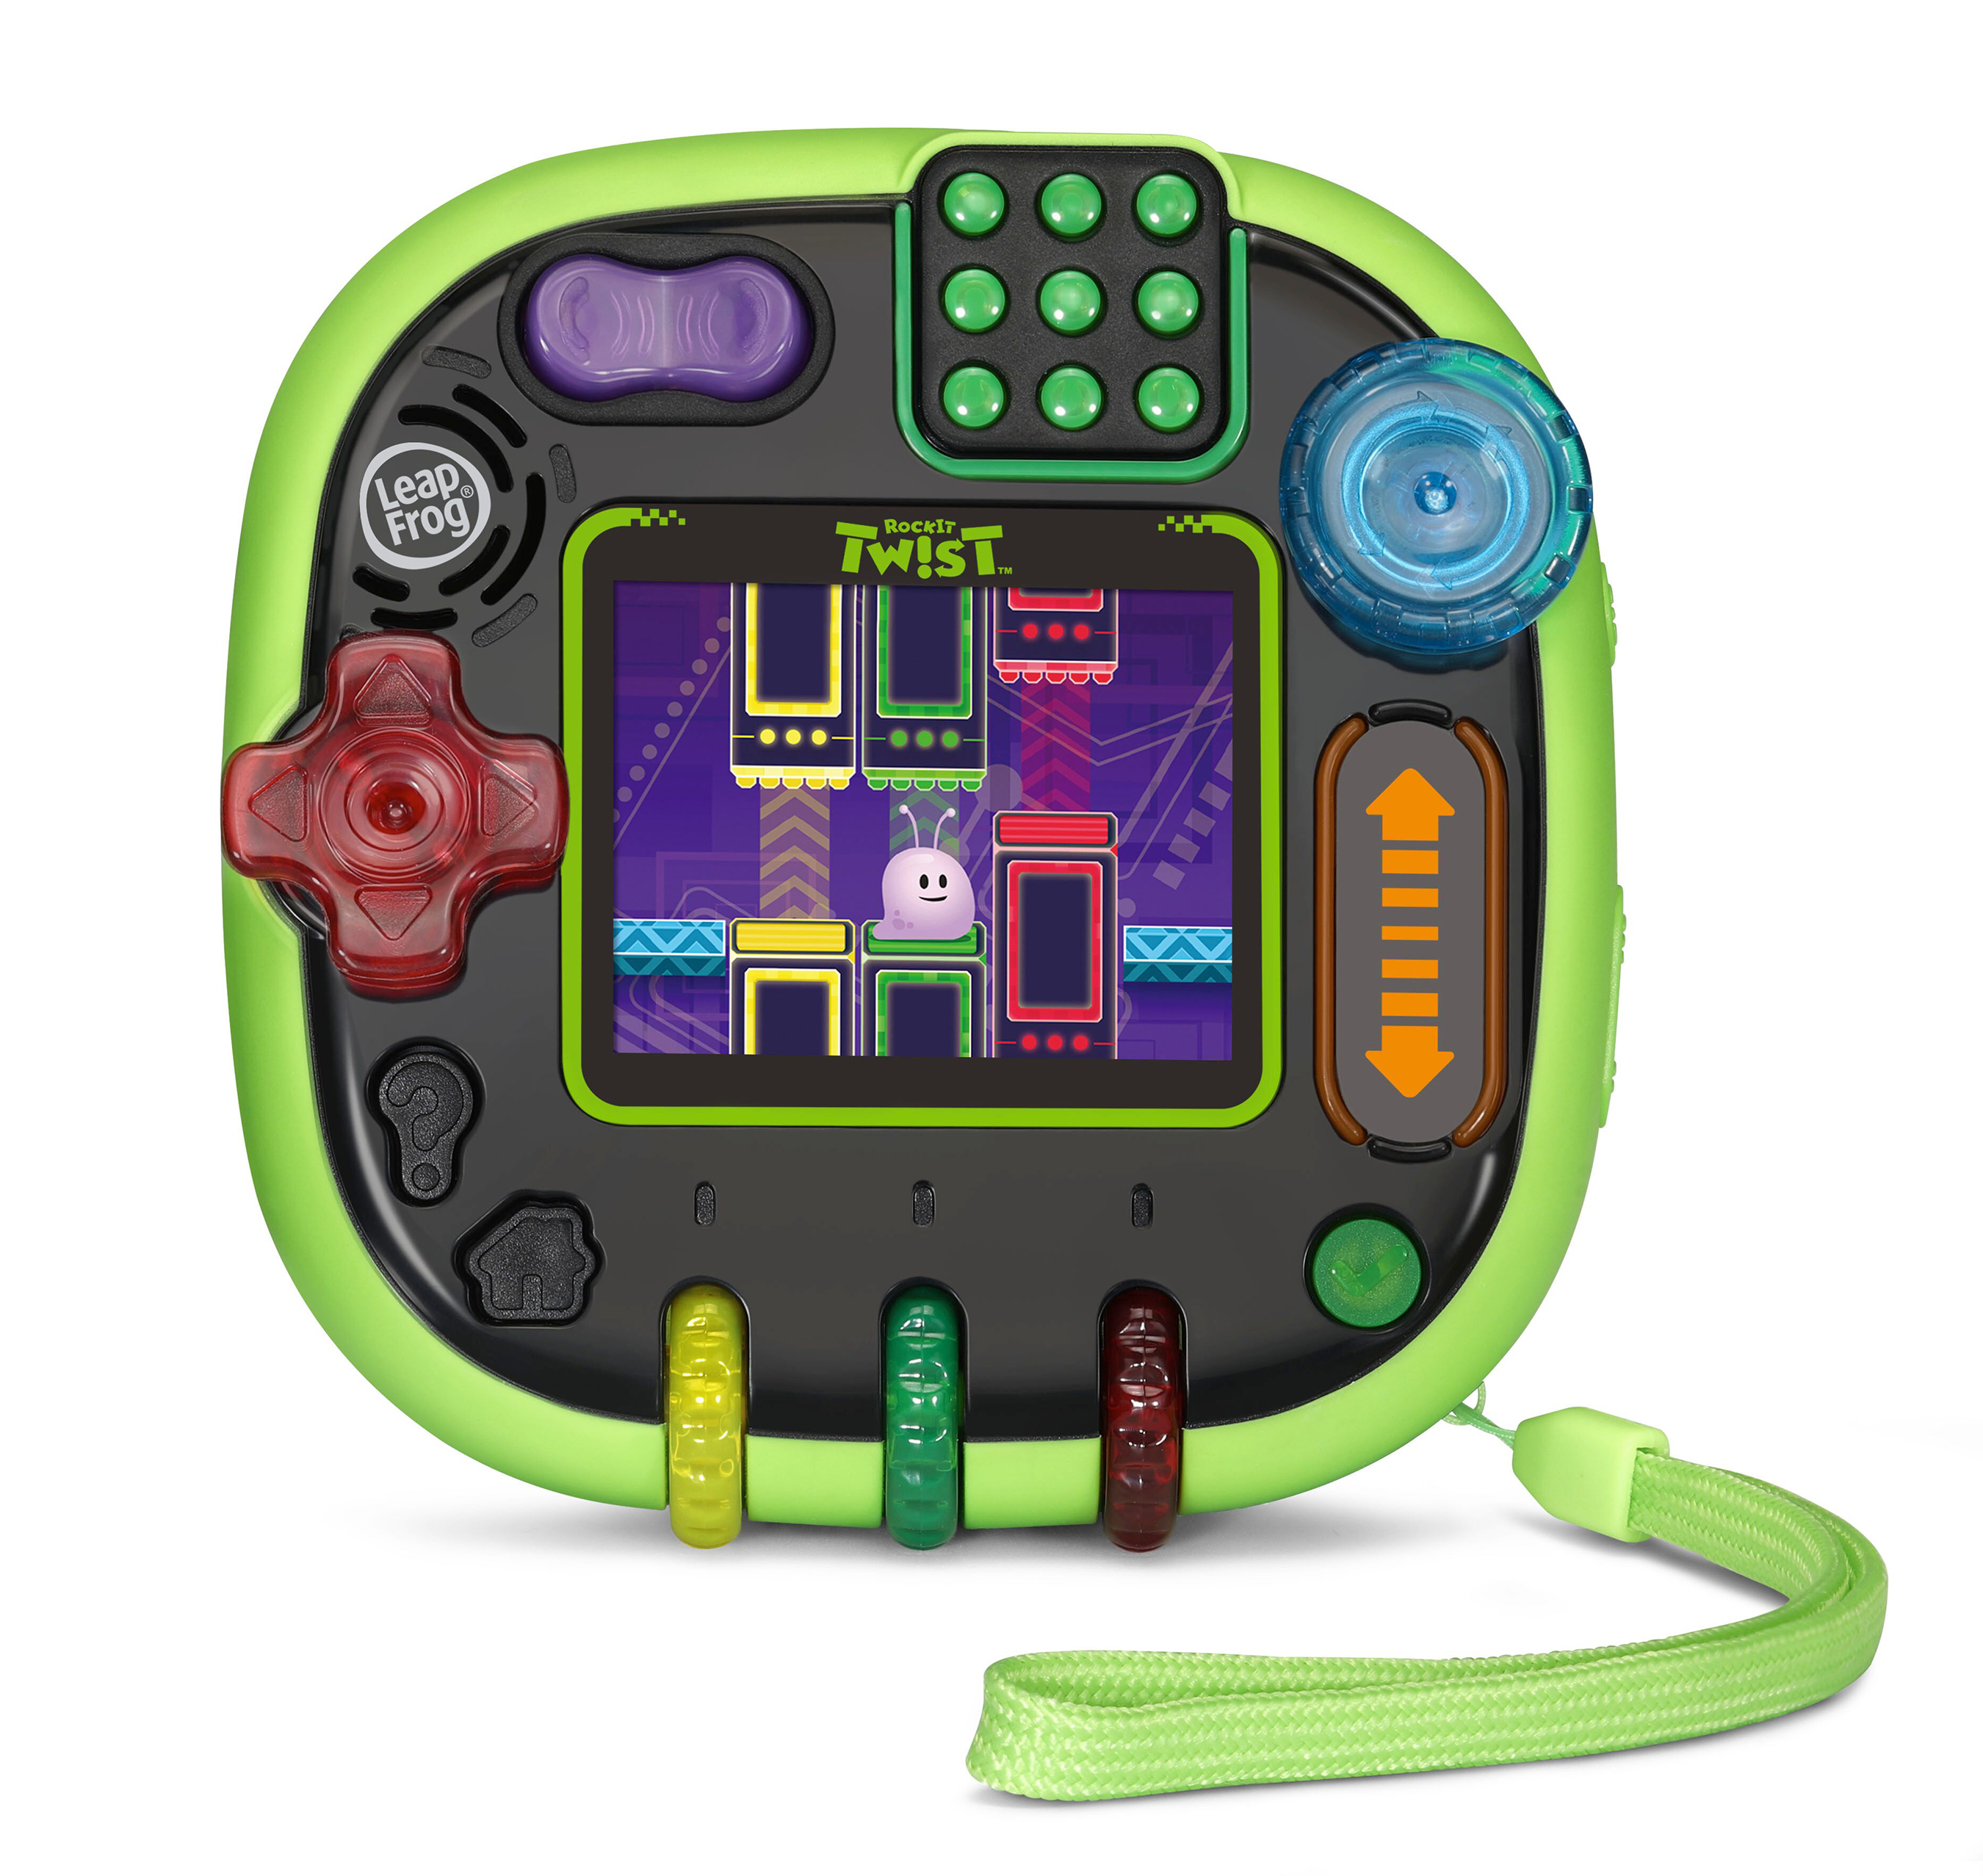 LeapFrog® Puts a New Spin on Handheld Gaming with RockIt Twist™